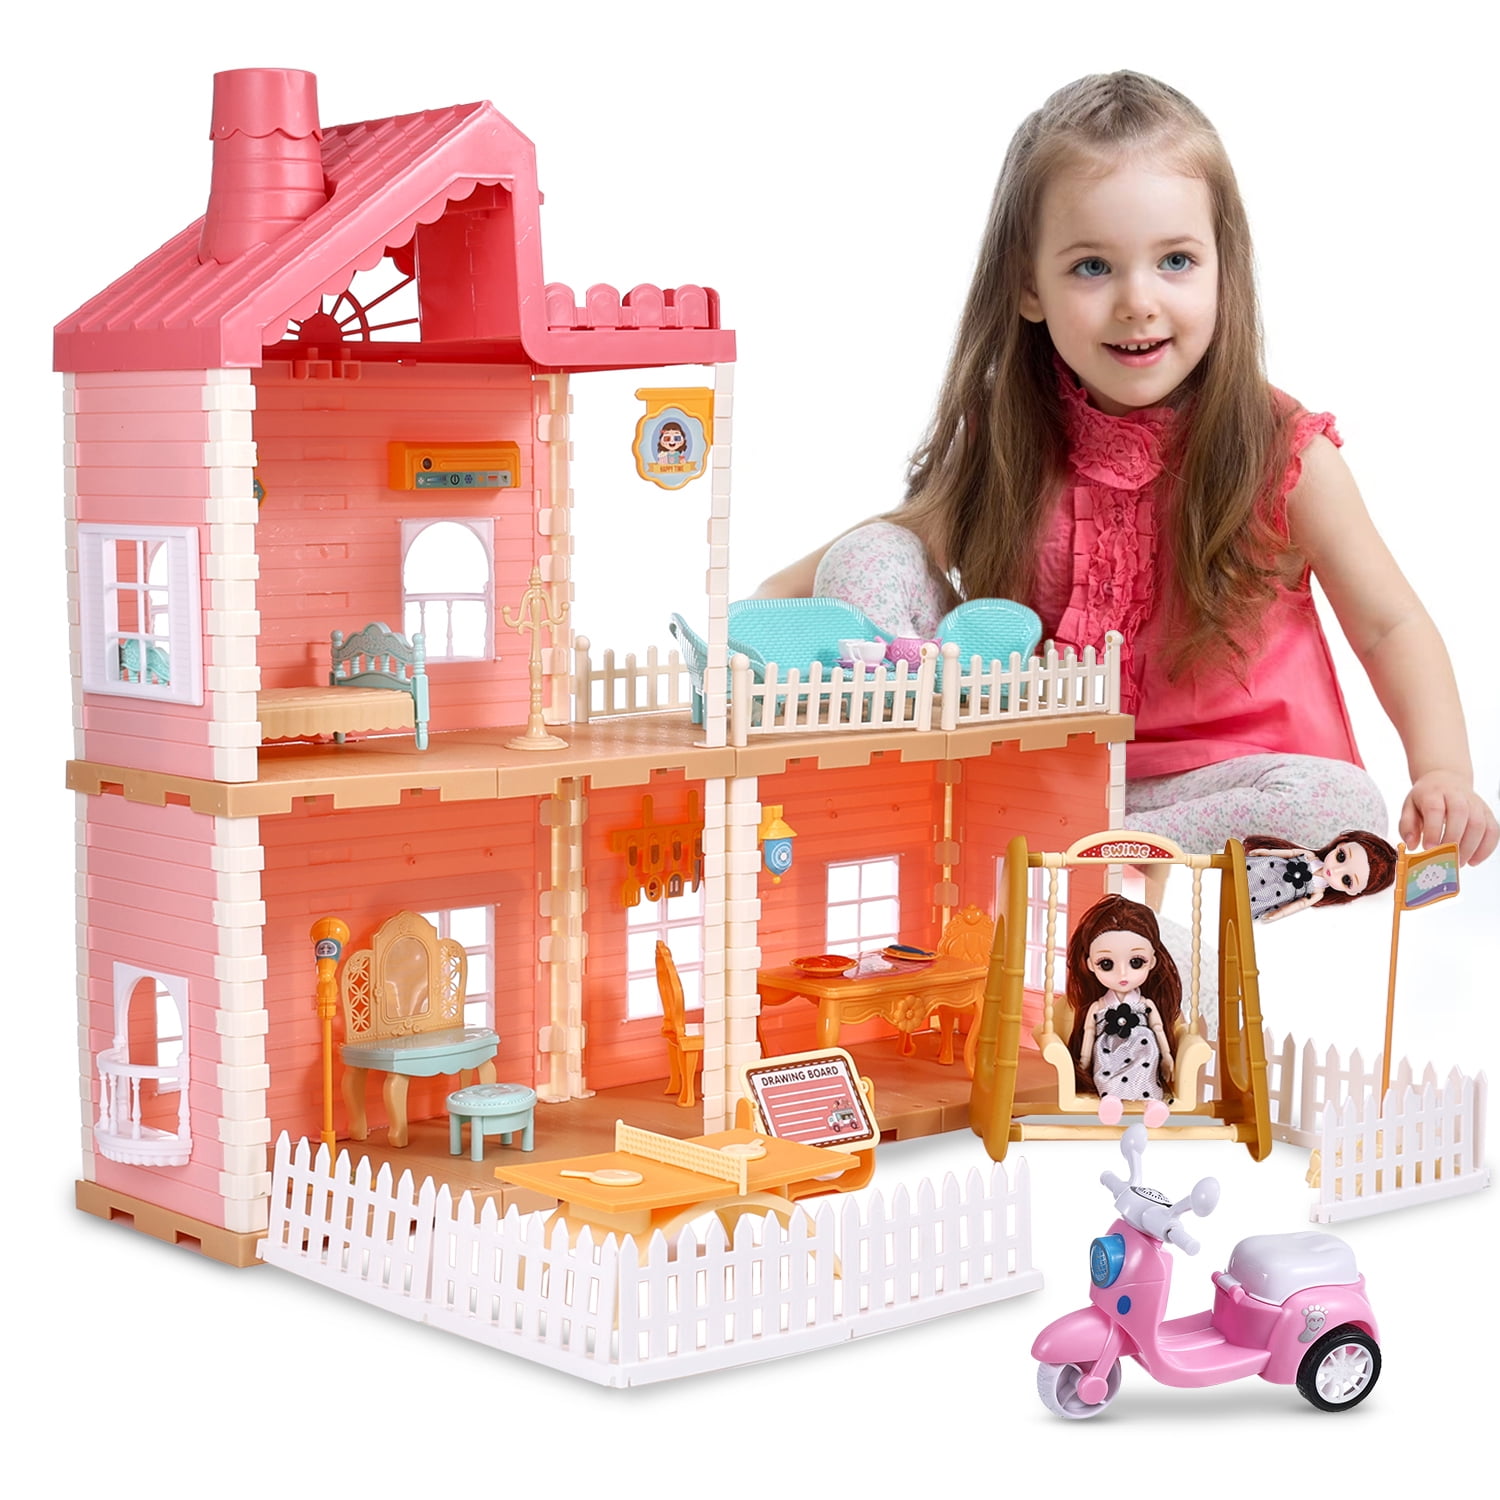 Zacro Dollhouse Girls Dreamhouse Playset, 3 Room Dollhouse with Doll Toy Figure, Furniture and Accessories, Color Lights, Steam Chimney, Play House Gift Toys for Kids Ages 3+